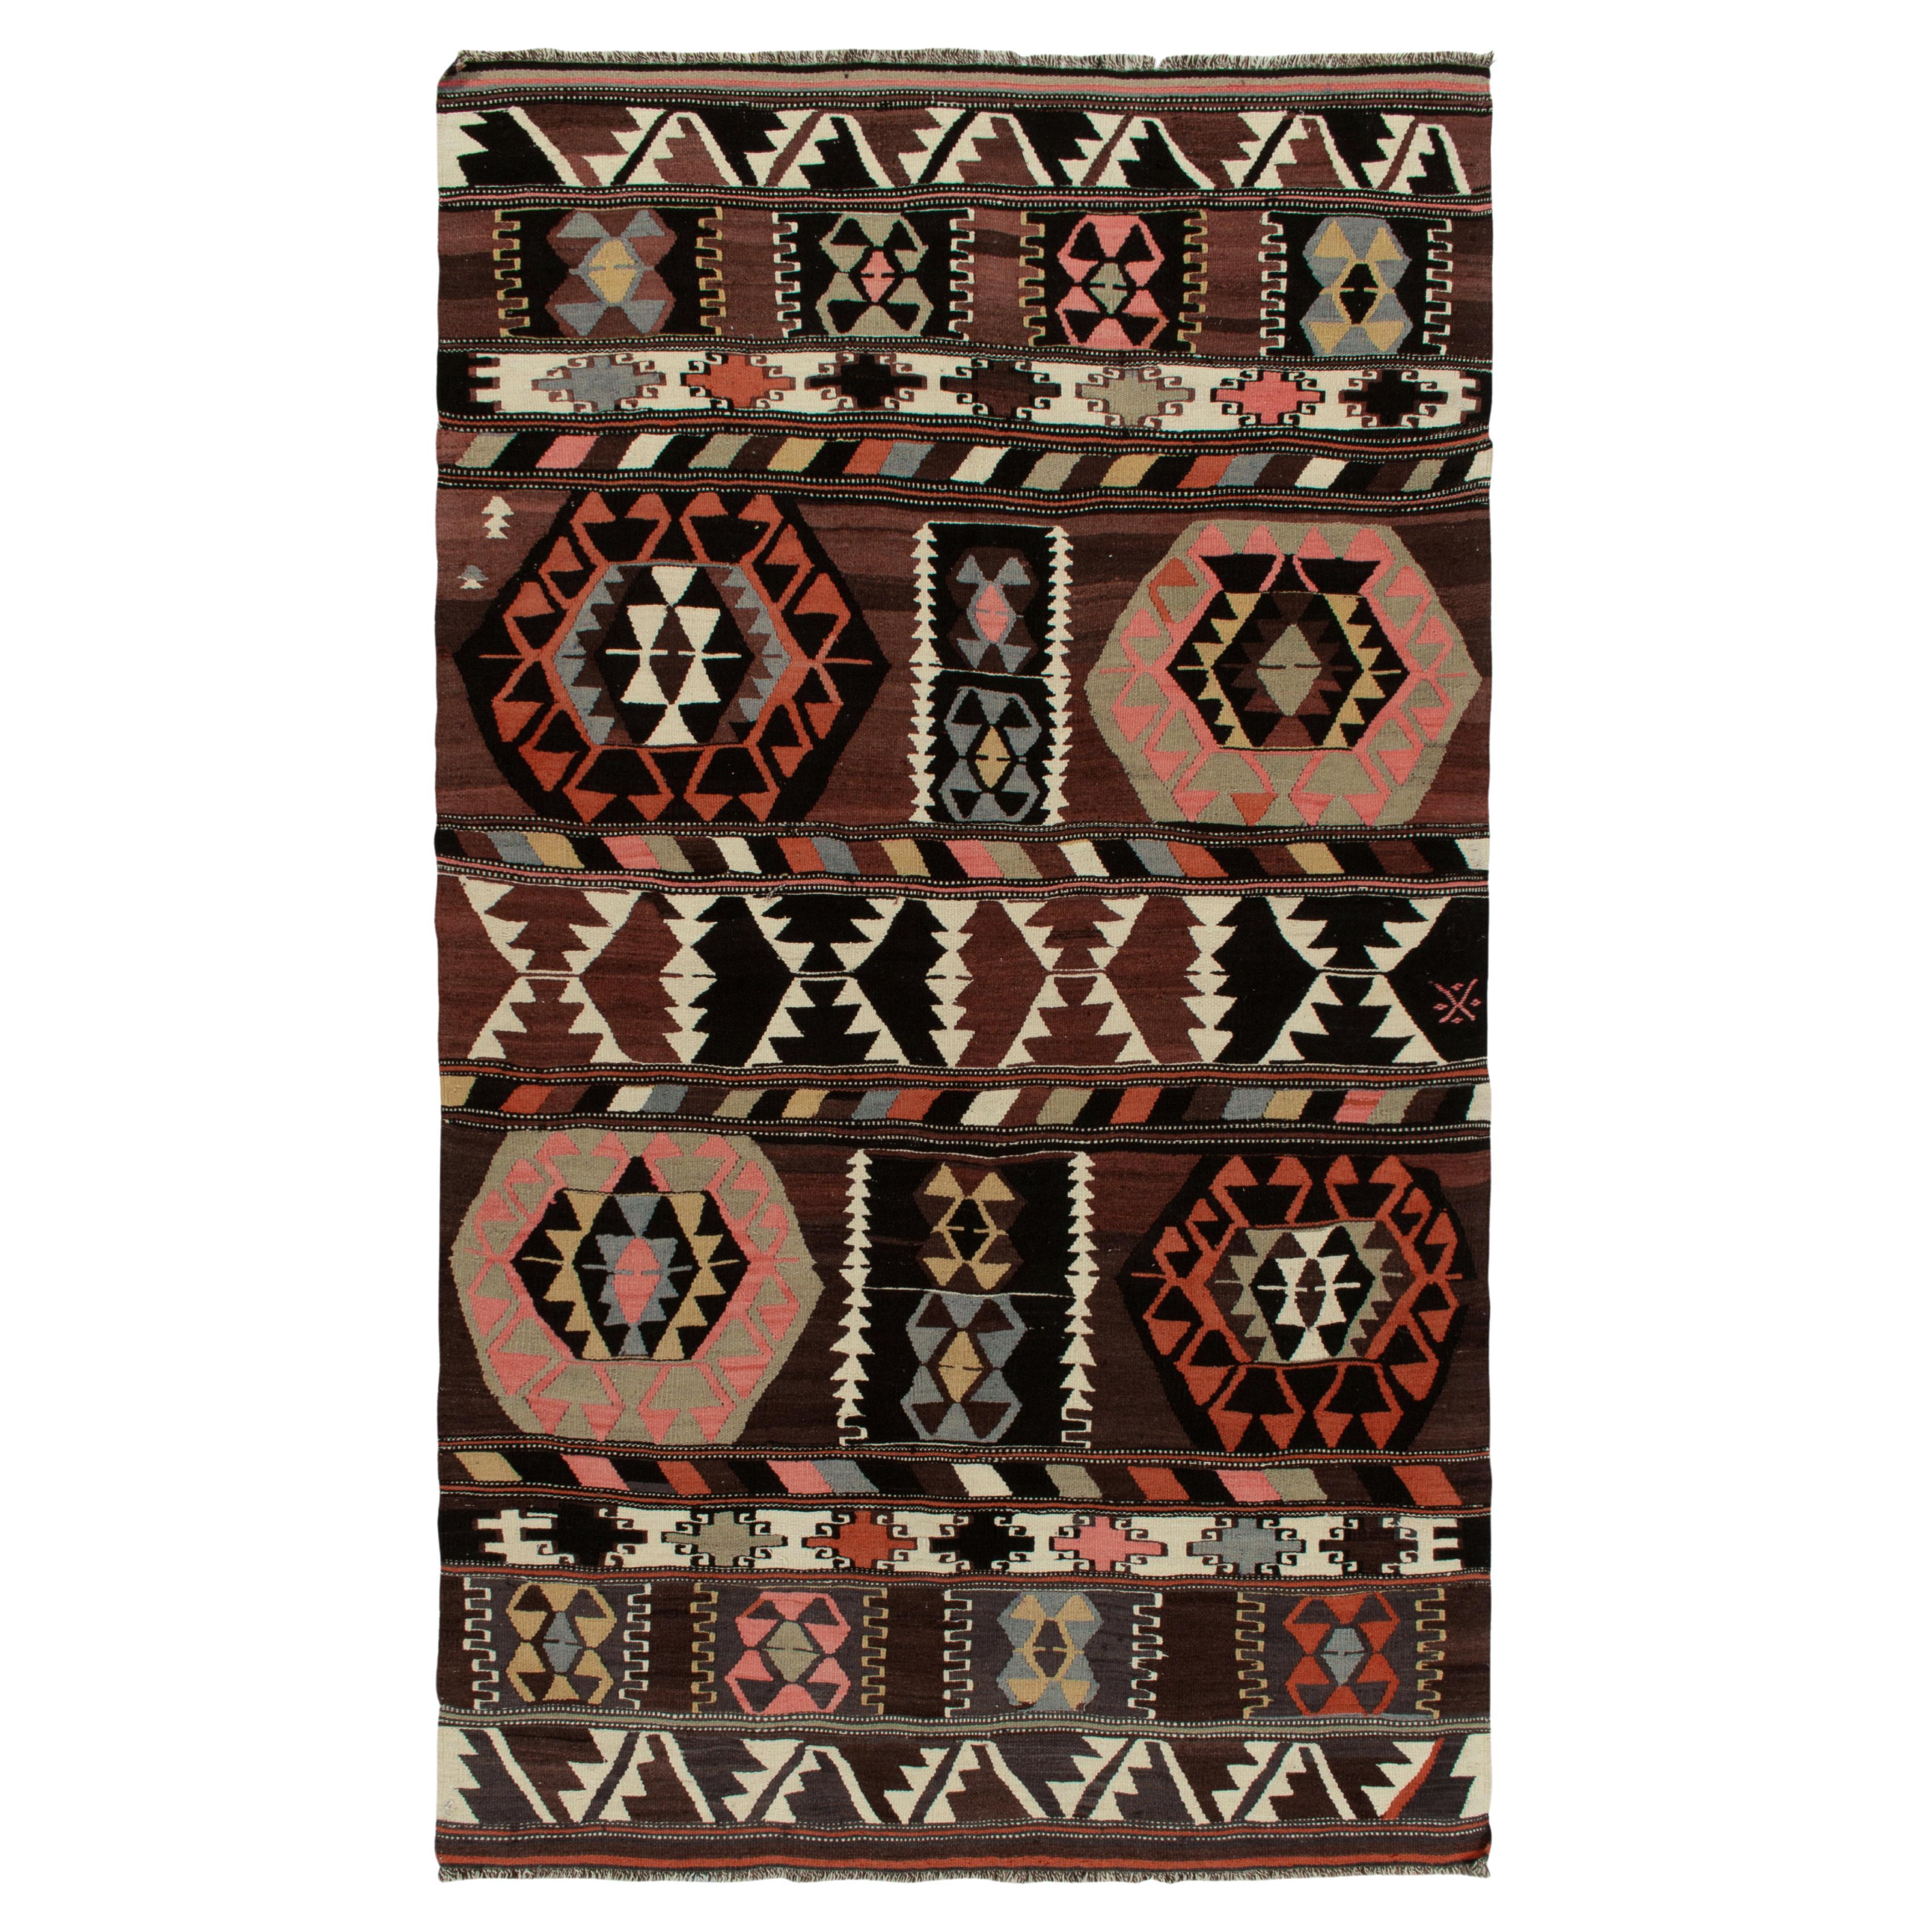 1940s Vintage Kilim in Brown with Blue and Red Tribal Patterns by Rug & Kilim